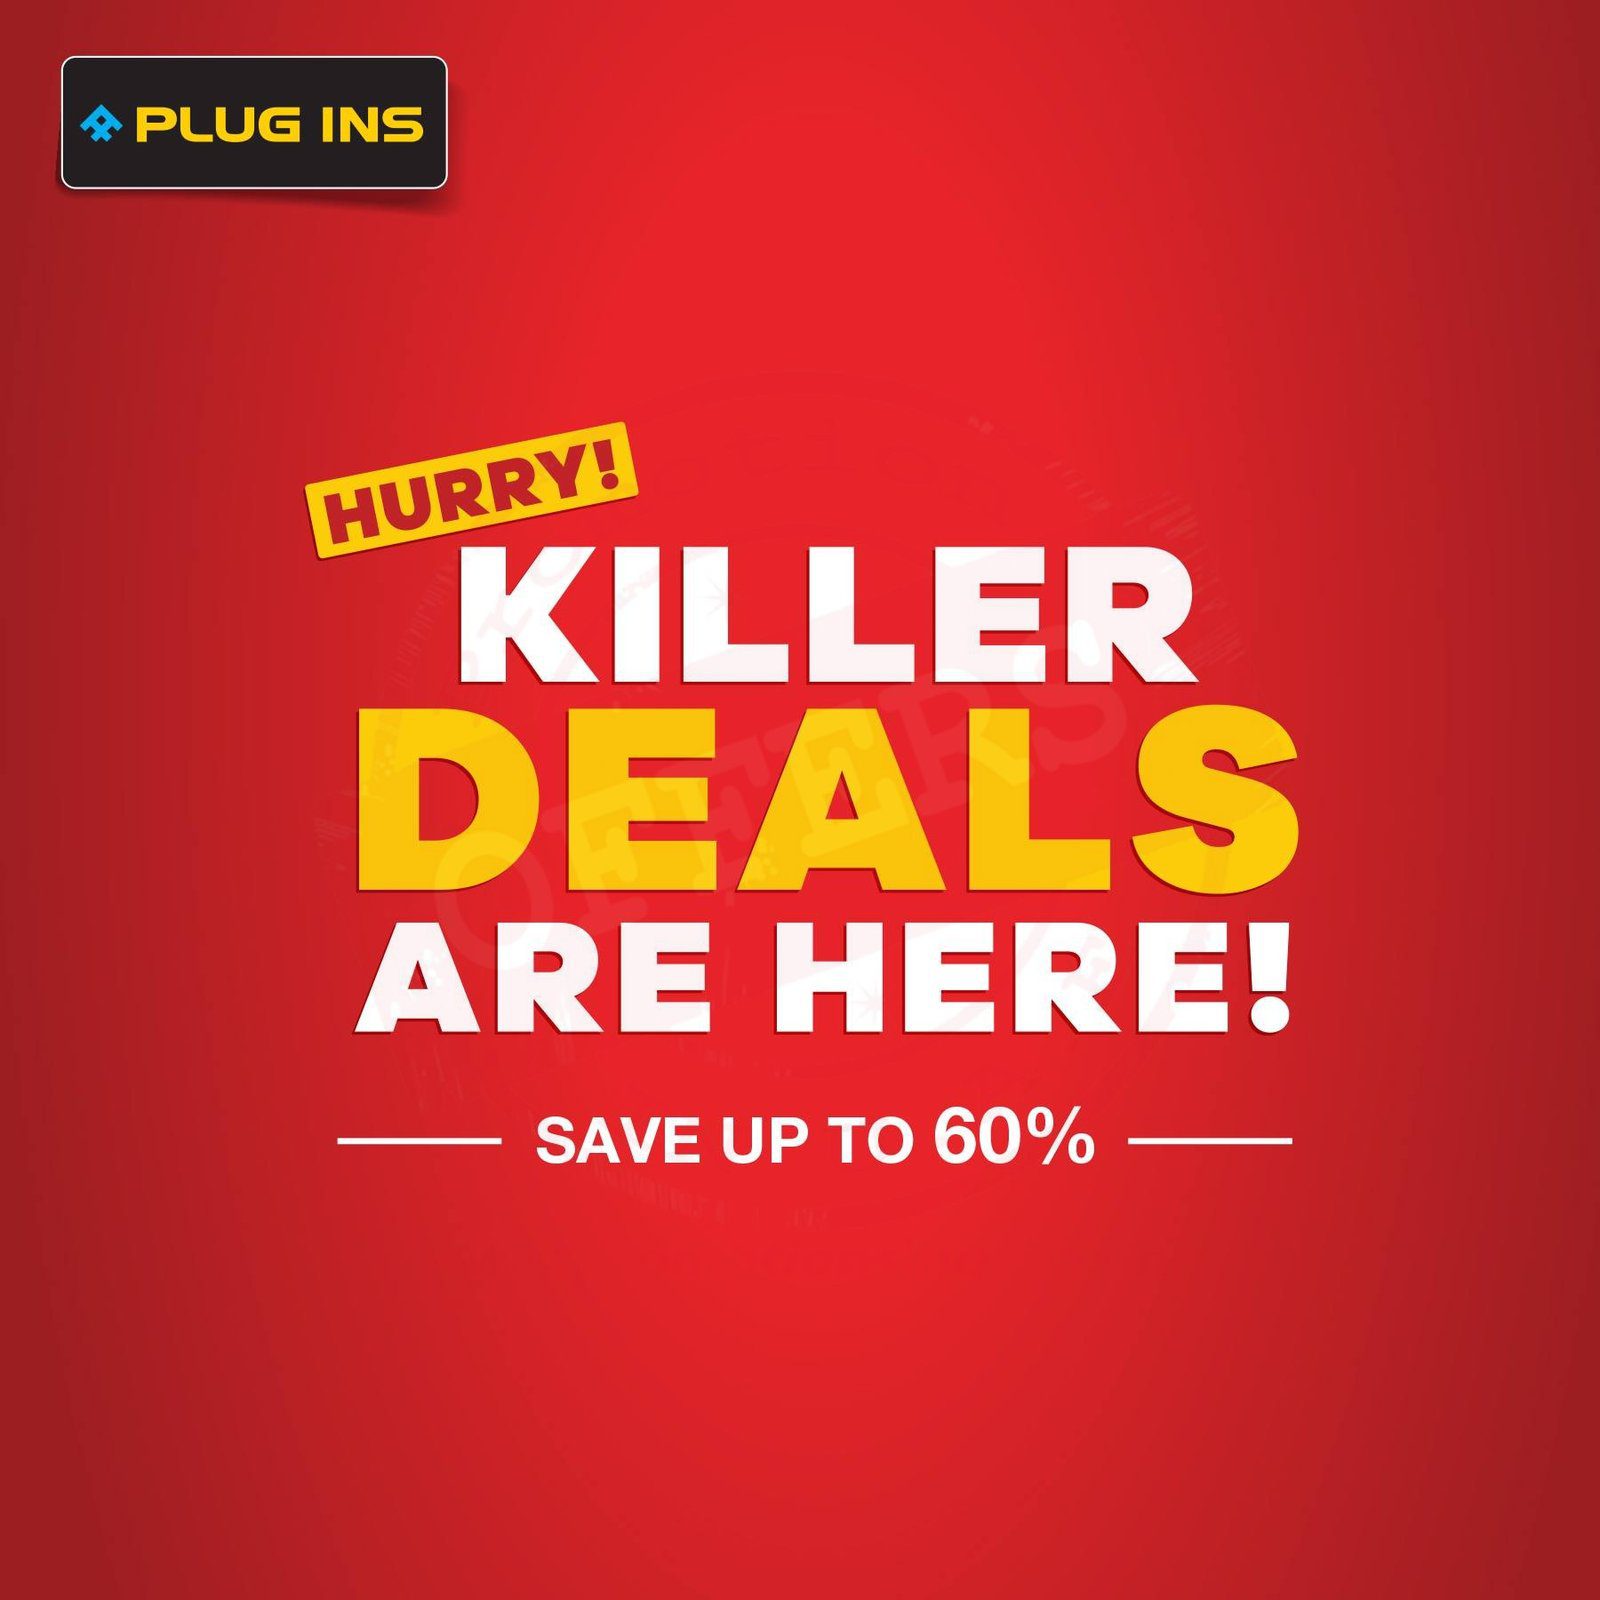 PLUG INS OFFER SAVE UP TO 60%